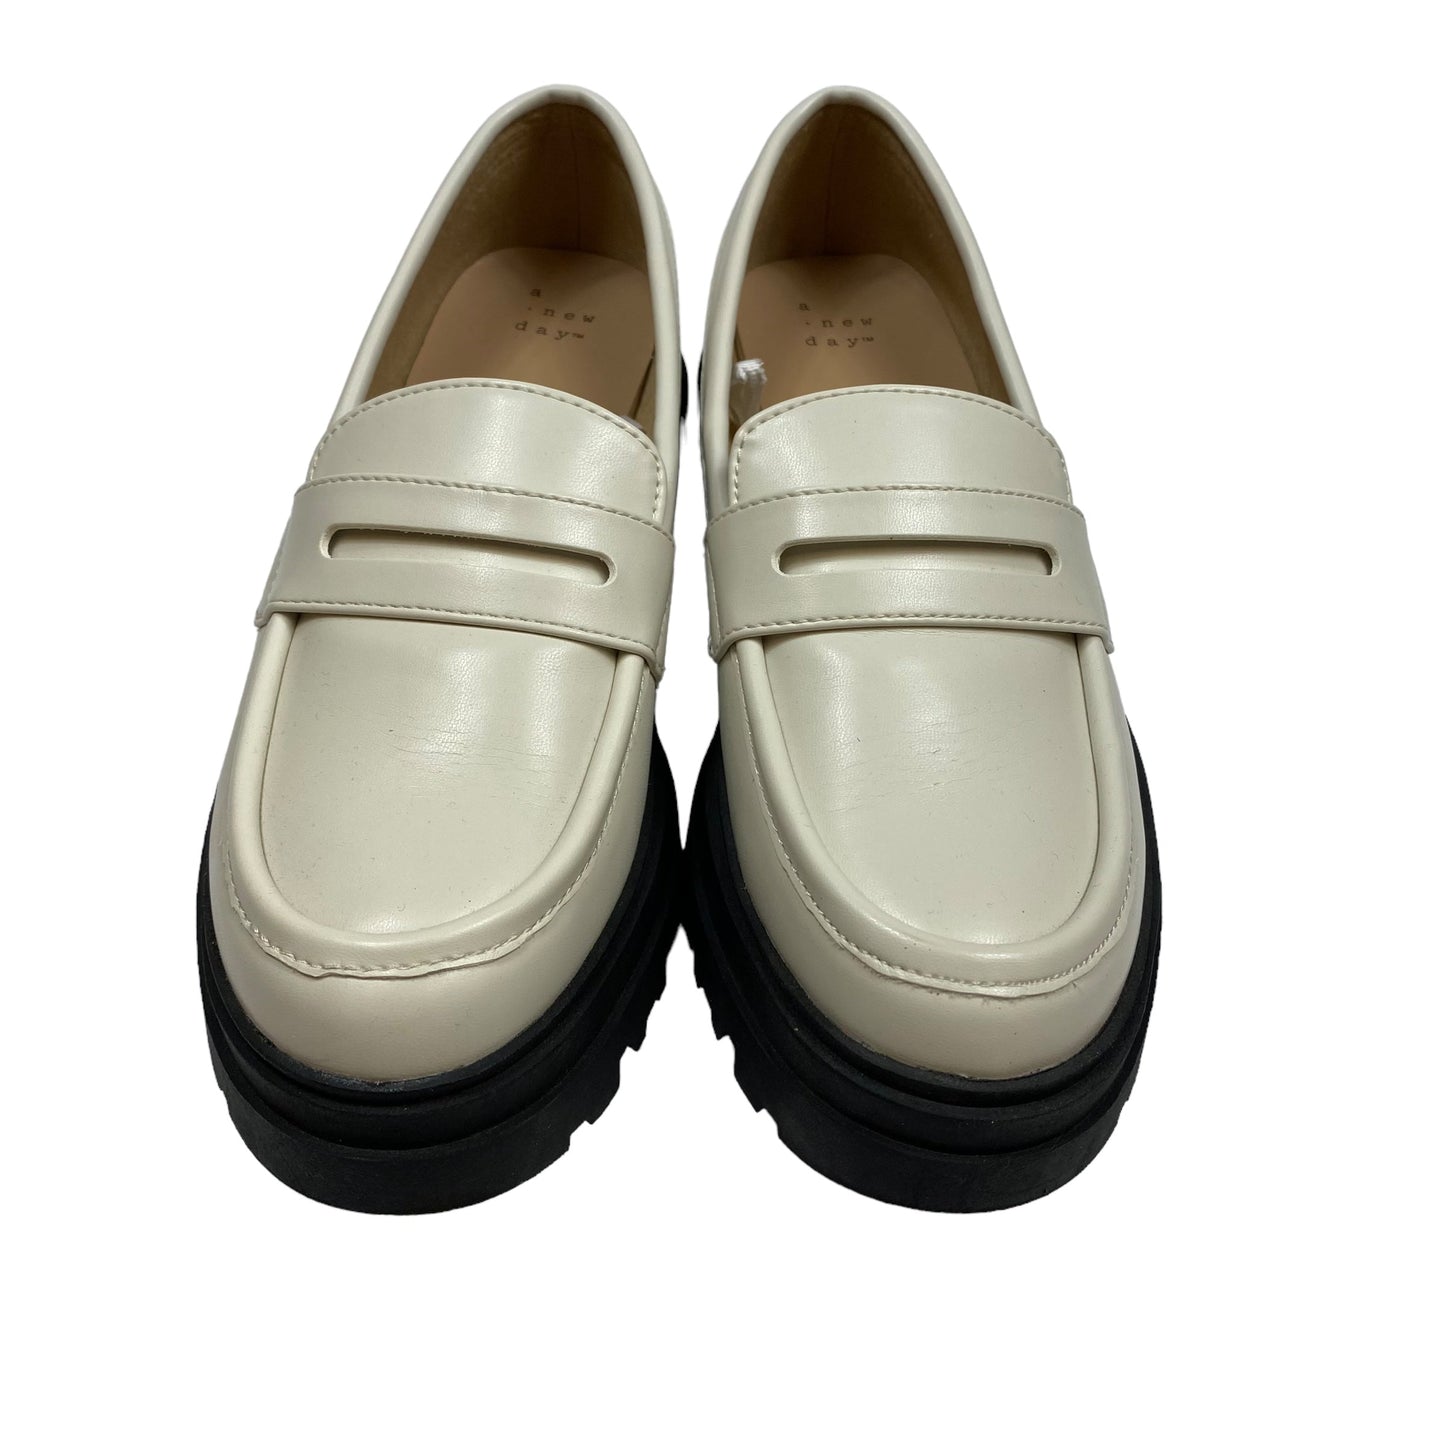 Cream Shoes Flats A New Day, Size 8.5